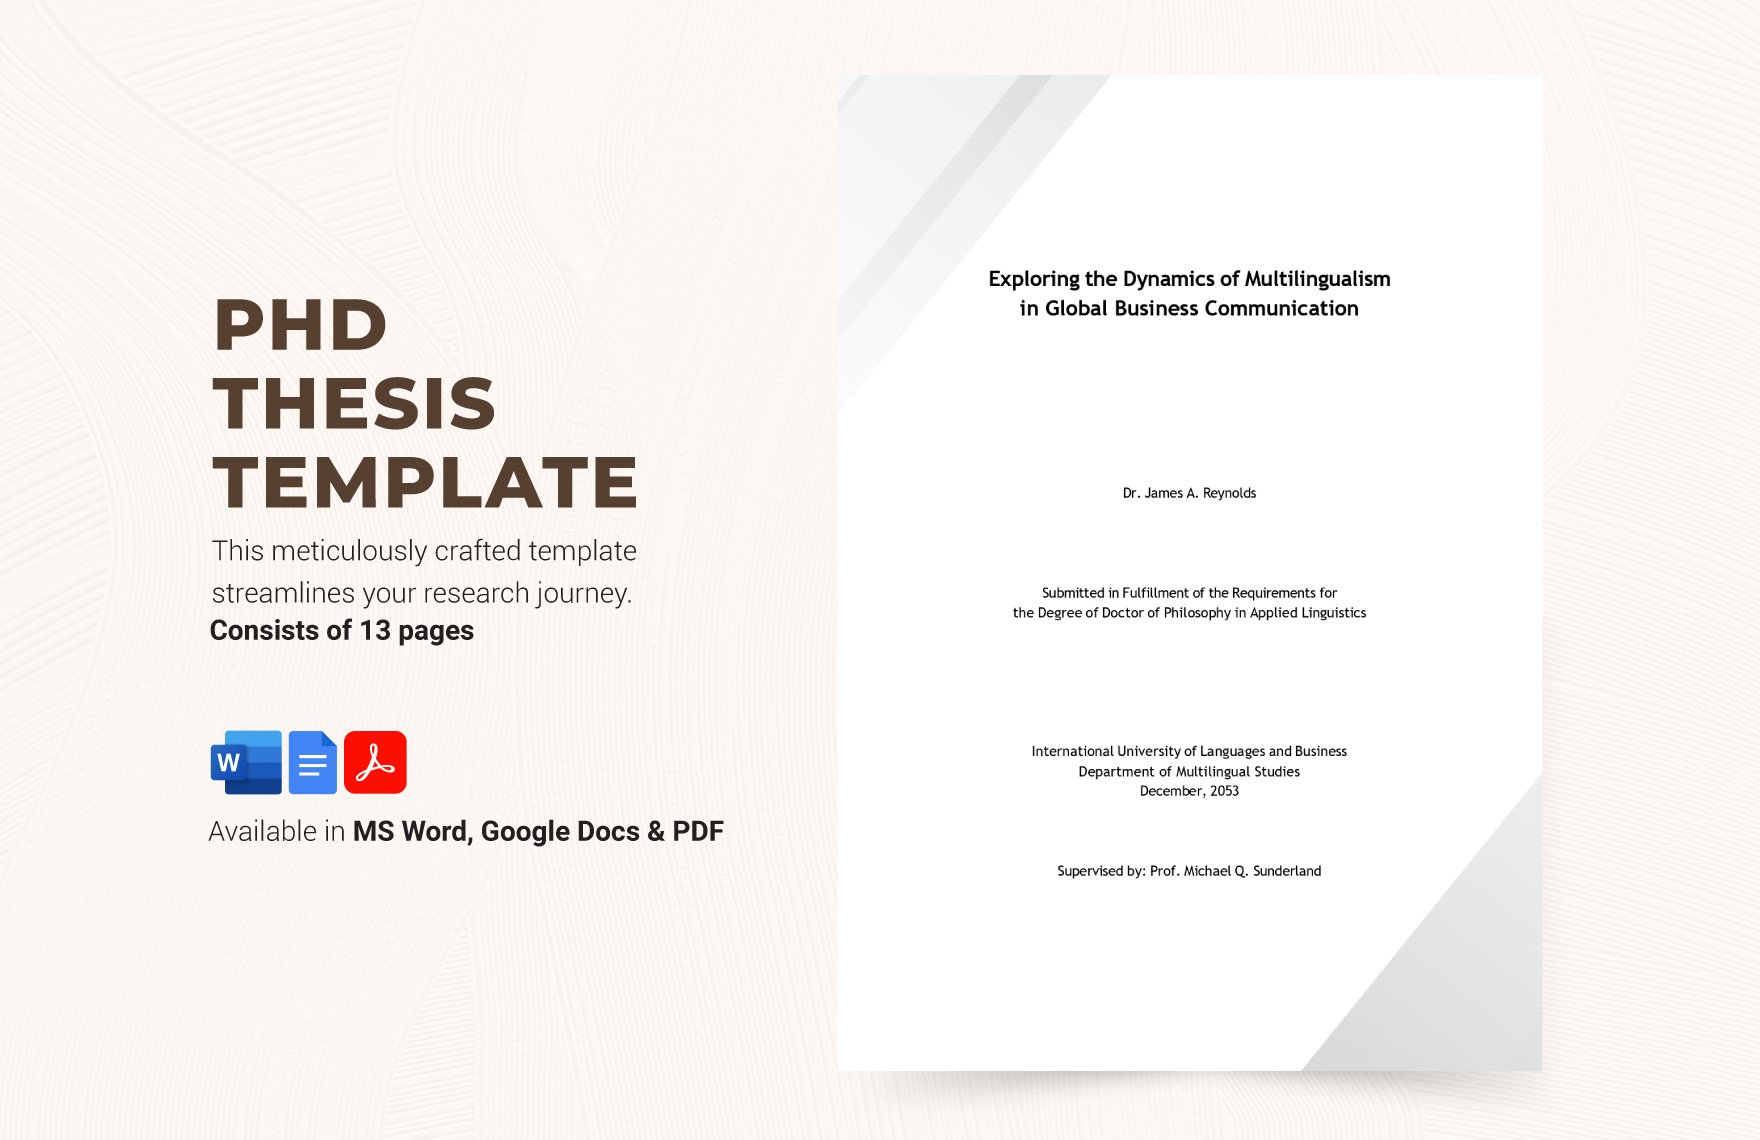 PHD Thesis Template